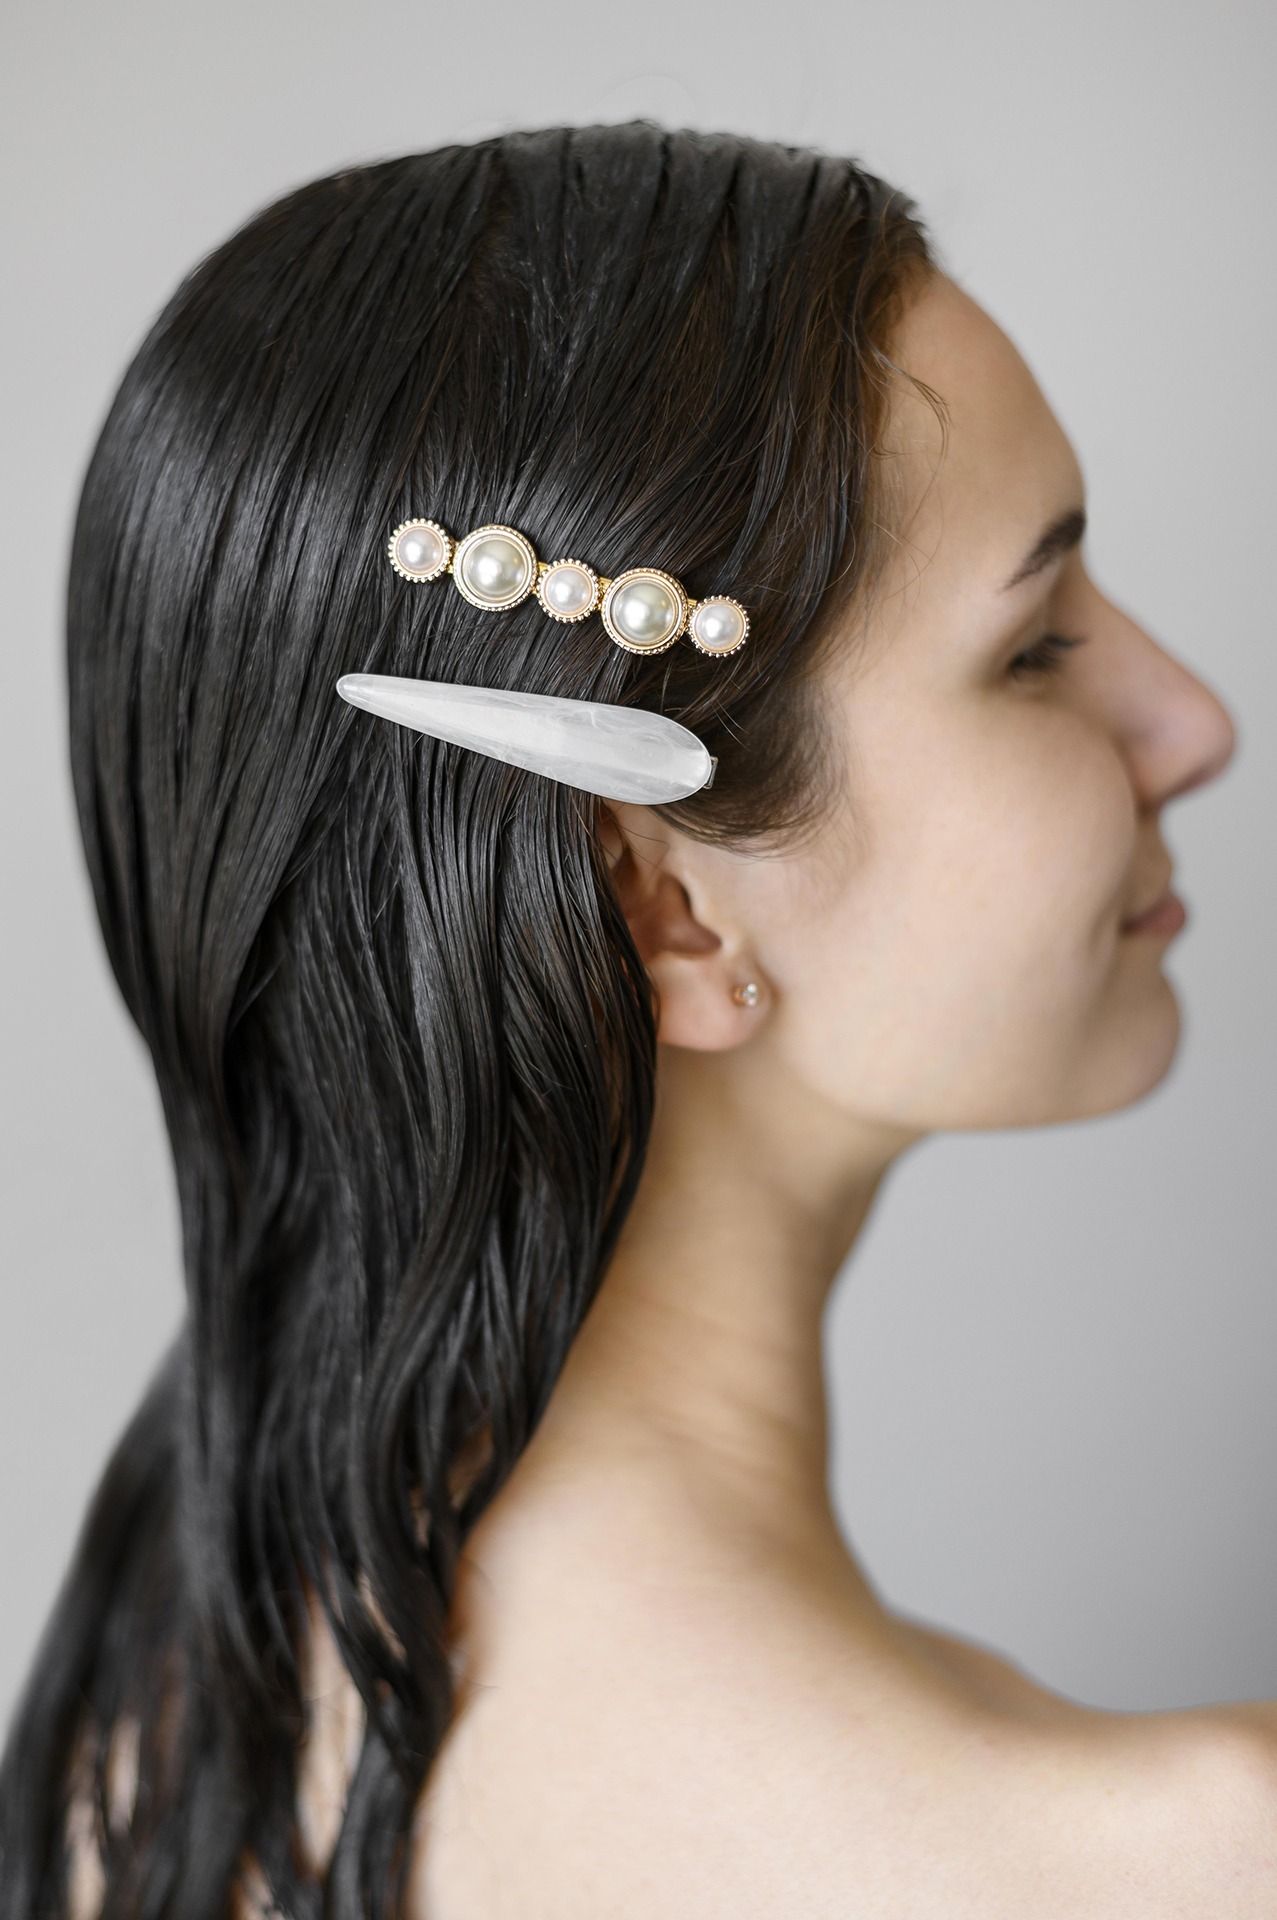 Woman wearing two hair clips is looking to the left.